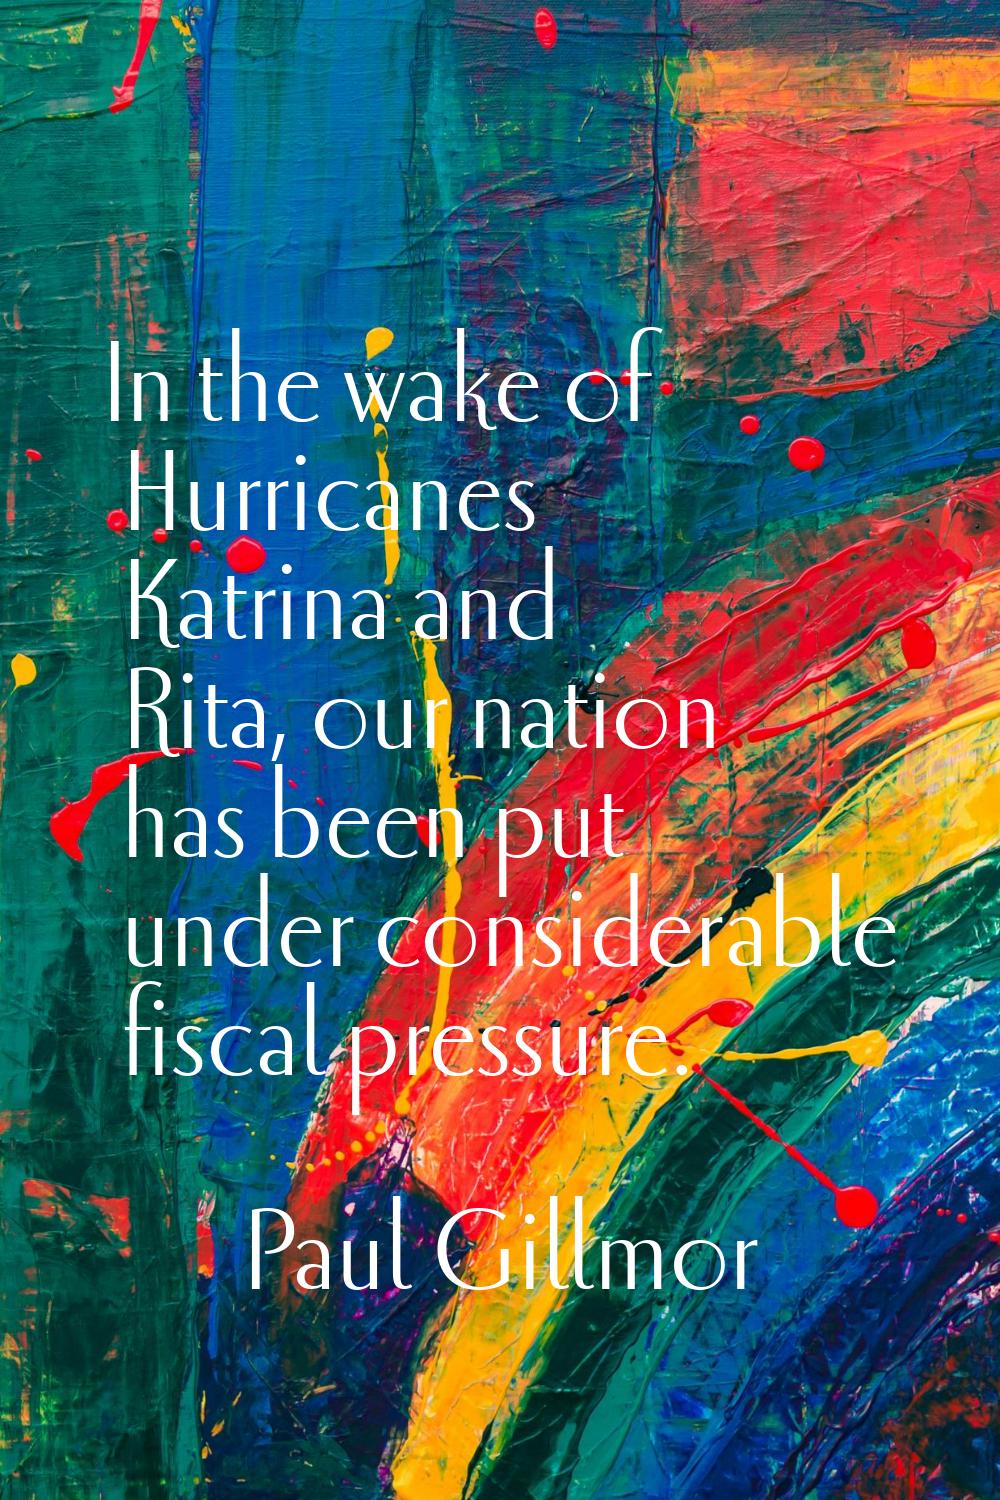 In the wake of Hurricanes Katrina and Rita, our nation has been put under considerable fiscal press